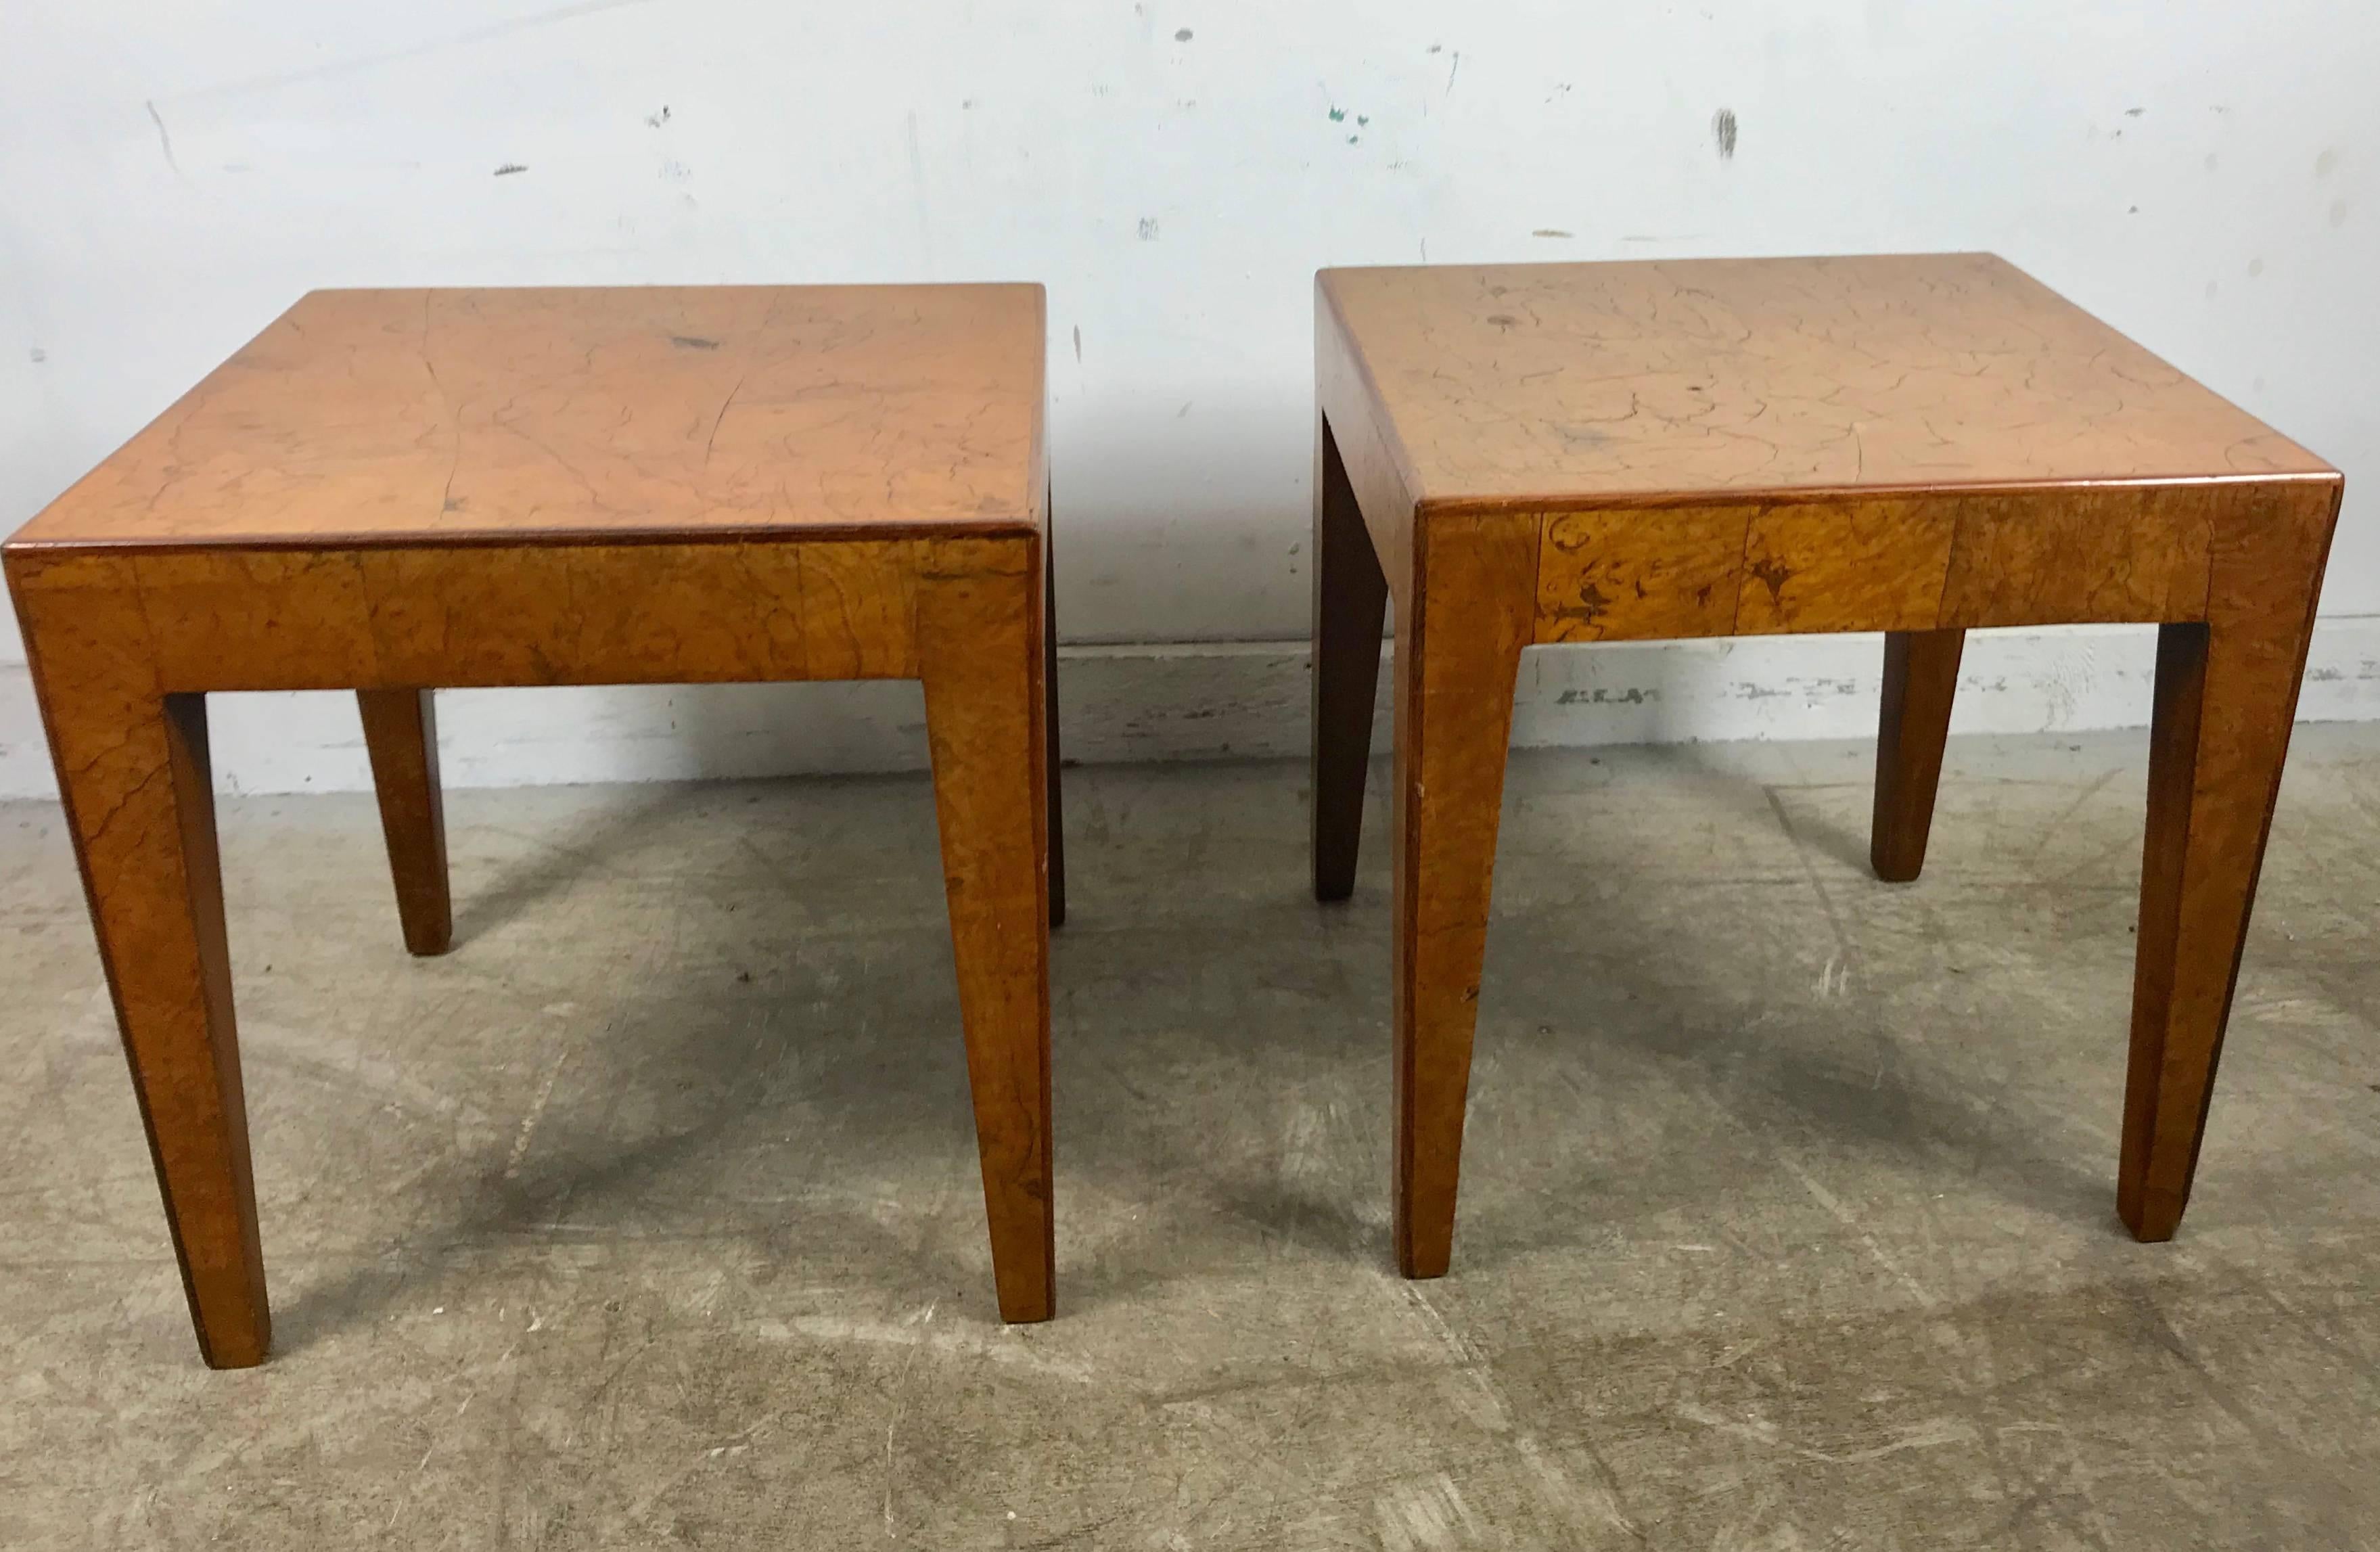 Organic Modern Pair of Elm Burl Wood Italian Modernist Tables 1940s after Willy Rizzo